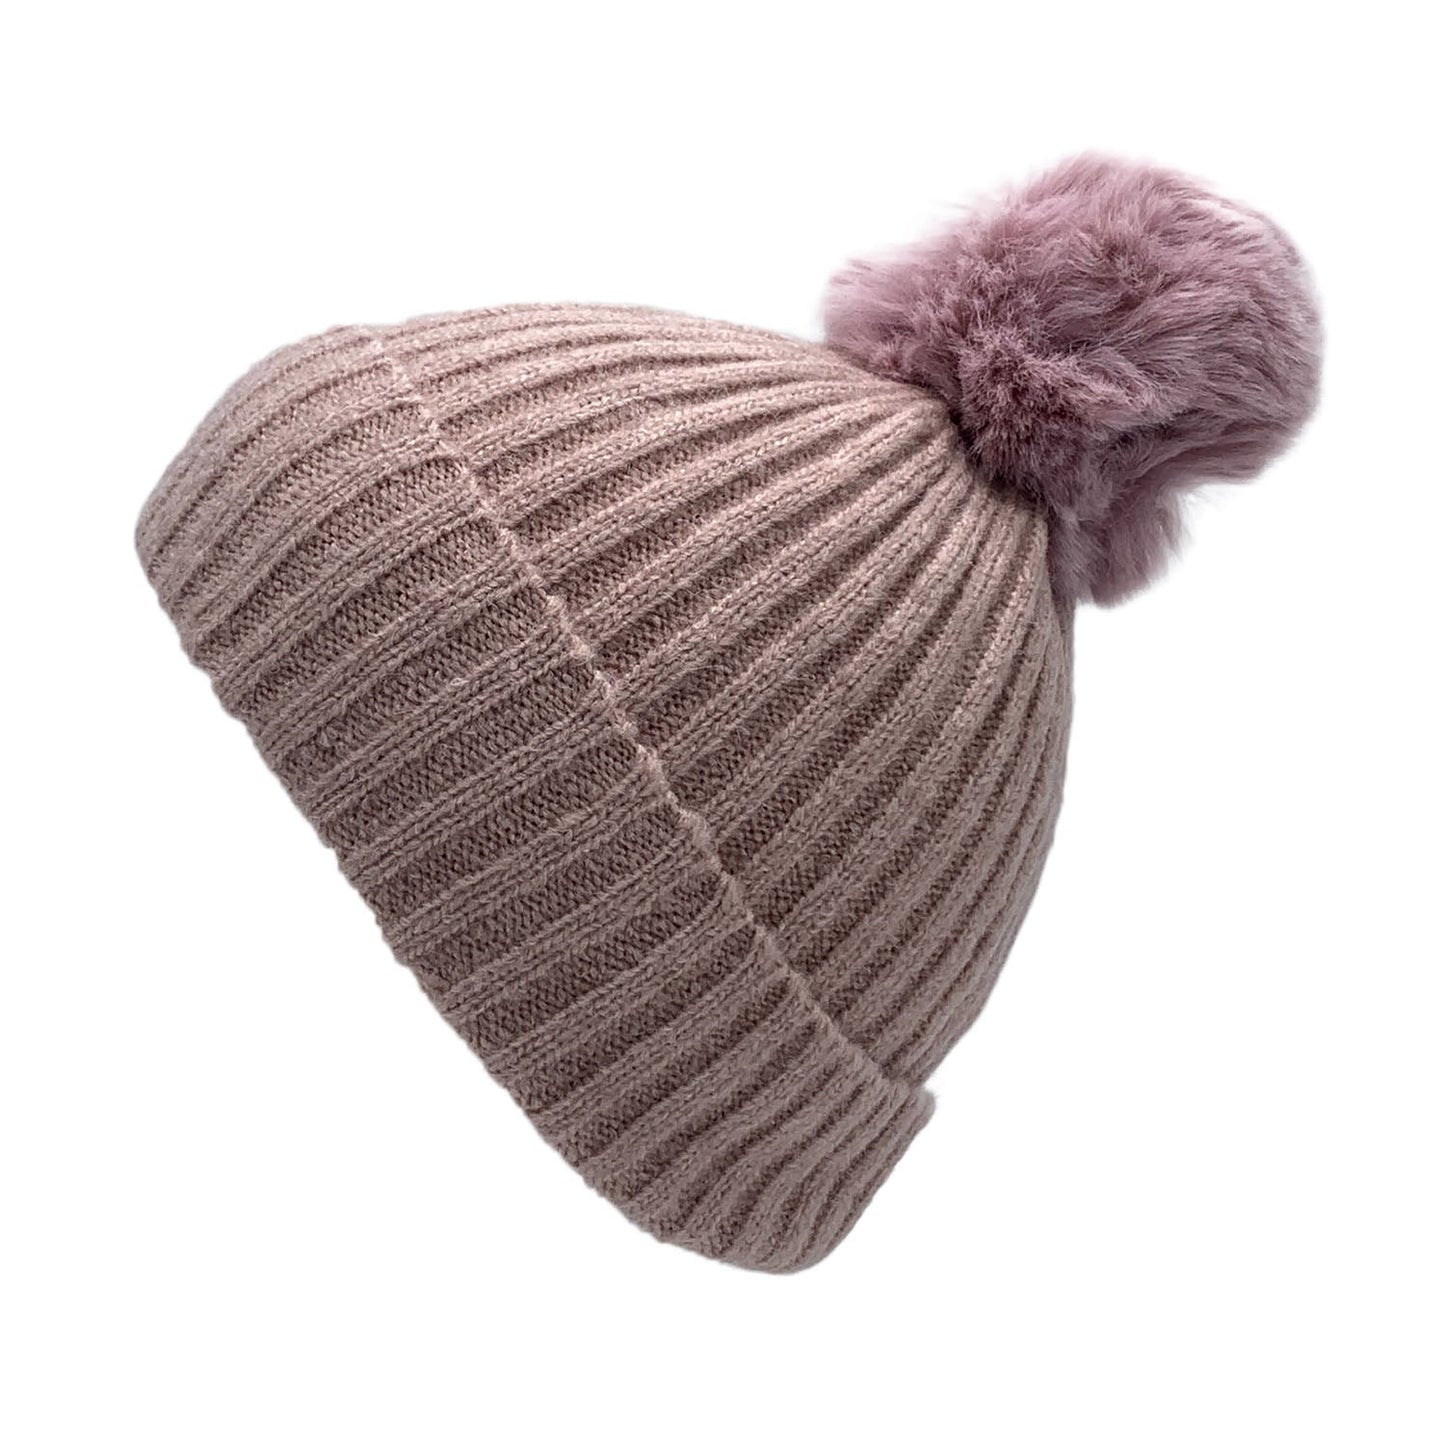 Empire Cove Winter Kids Boys Girls Cable Knit Cuff Beanie with Pom Pom-UNCATEGORIZED-Empire Cove-Pink-Casaba Shop